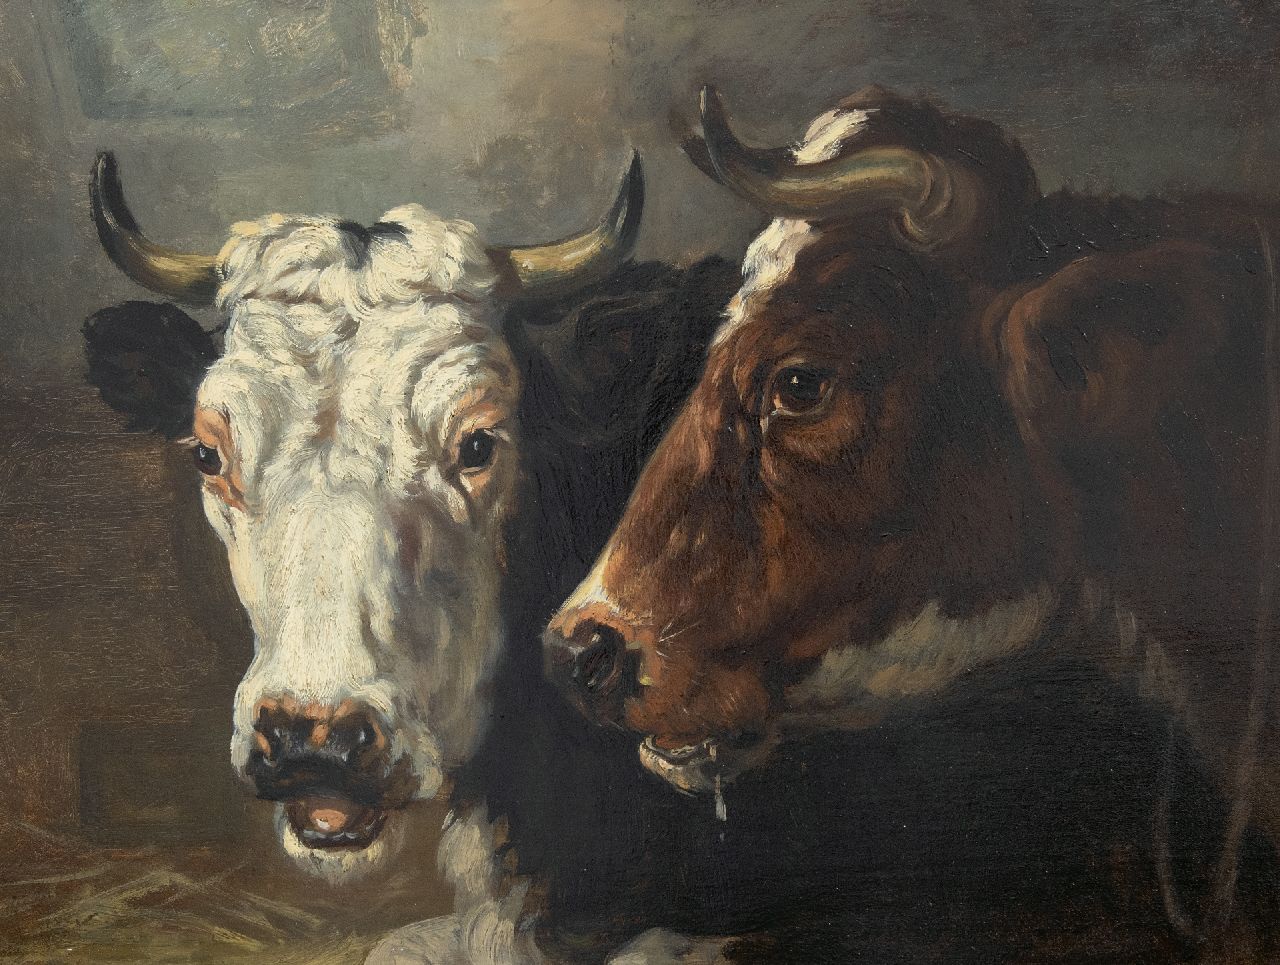 Burnier R.  | Richard Burnier, Two cows's heads, oil on panel 32.3 x 45.0 cm, signed on the reverse